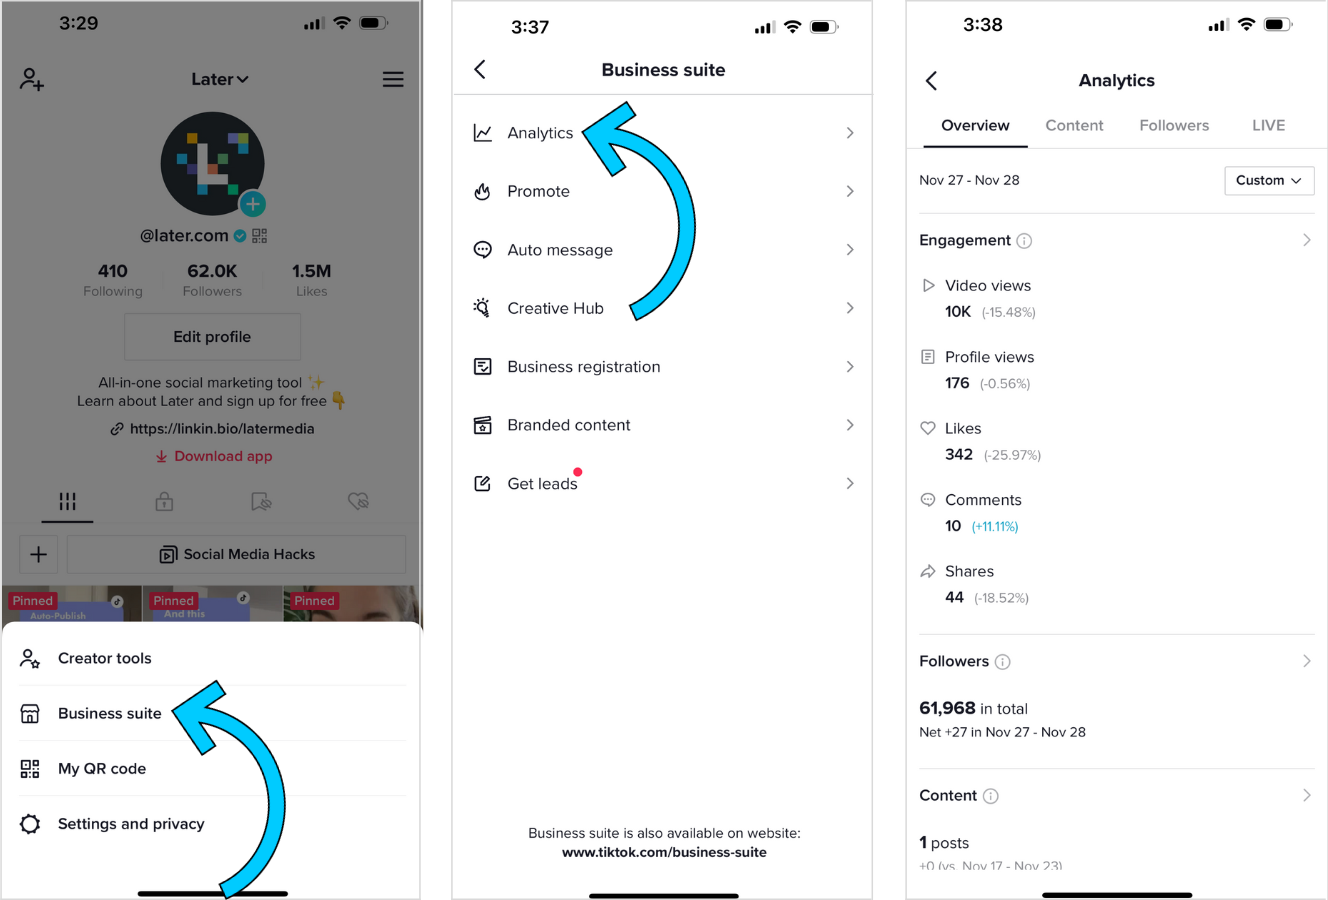 Screenshots showing the steps for discovering your TikTok analytics if you have a Business account